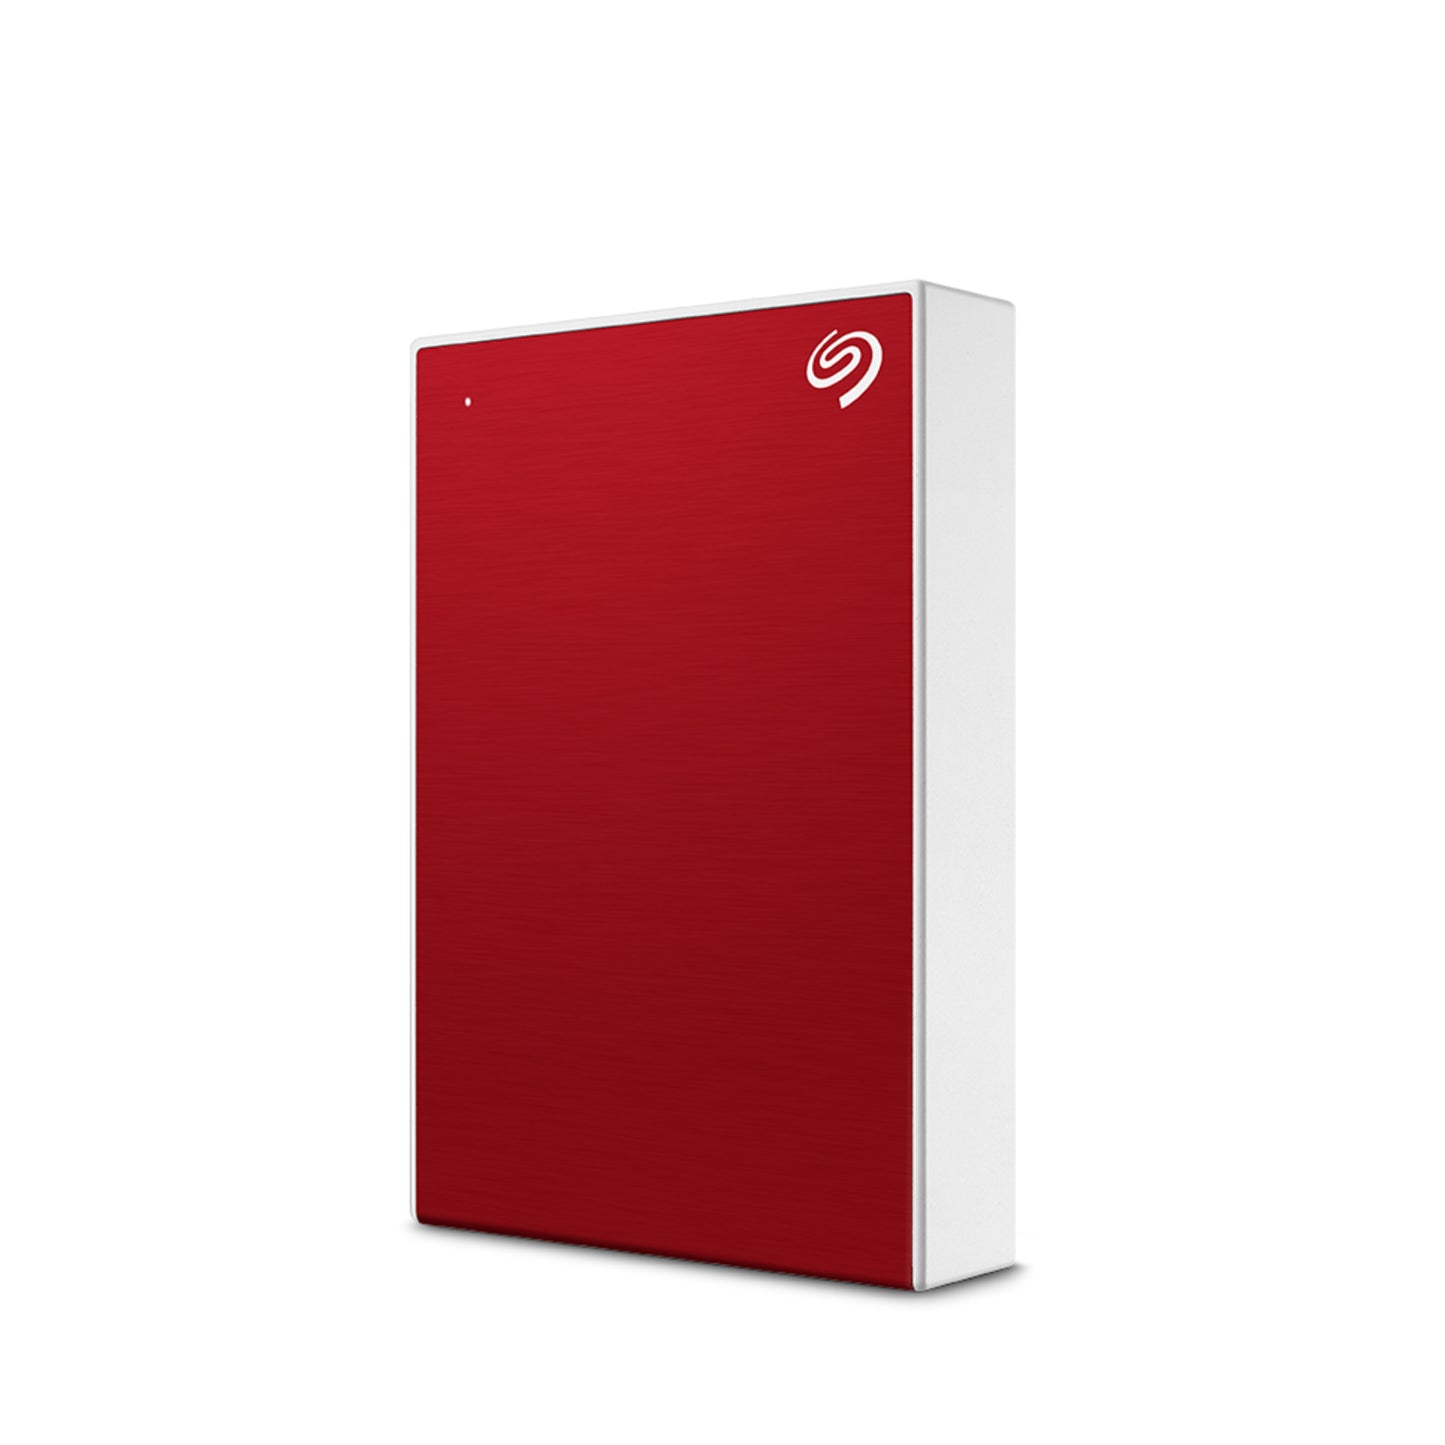 SEAGATE One Touch Slim USB 3.0 1TB - Red